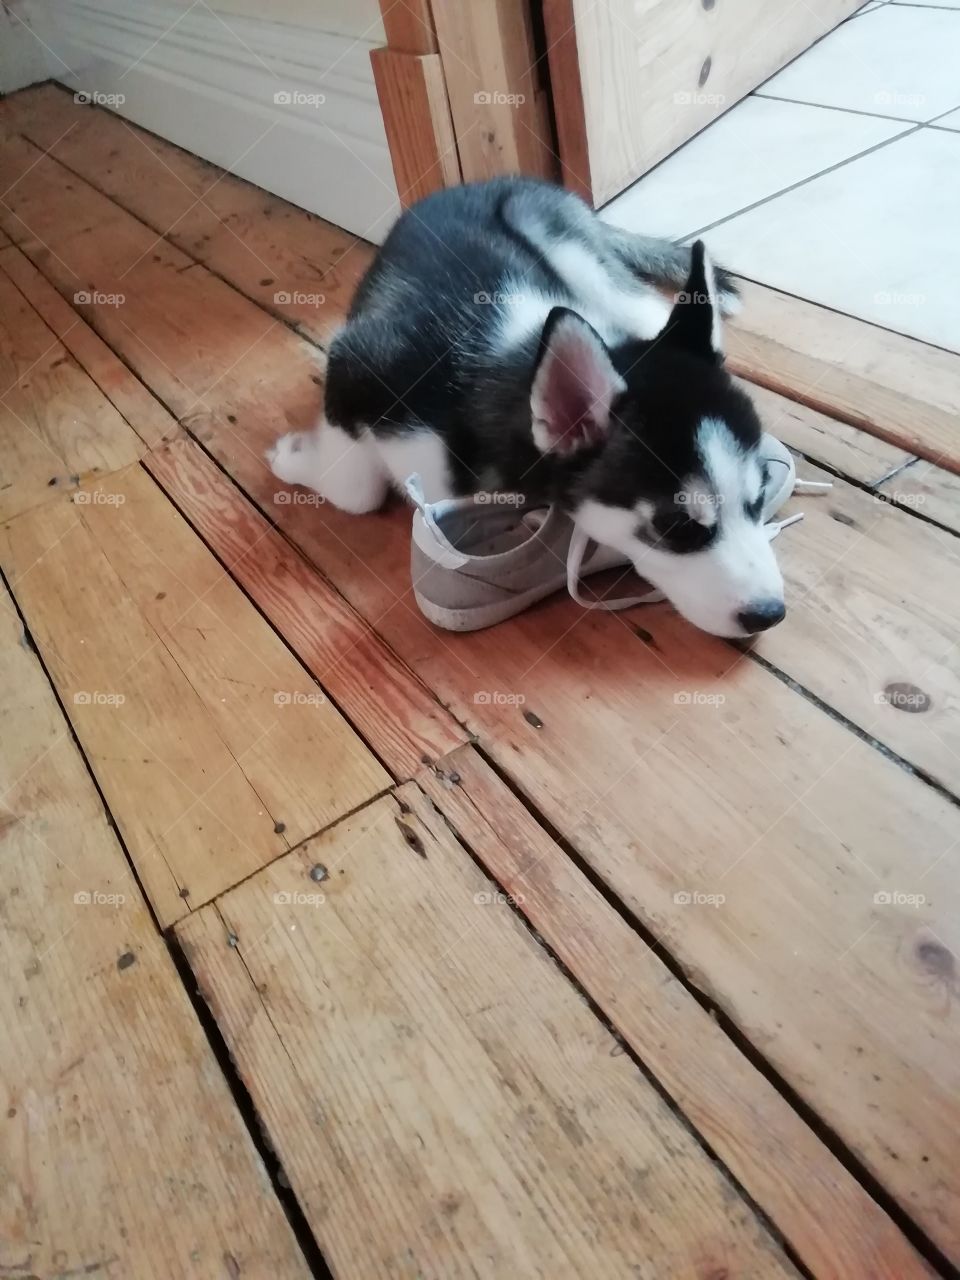 Husky puppy sleeping with a hooman's shoe at nap time.